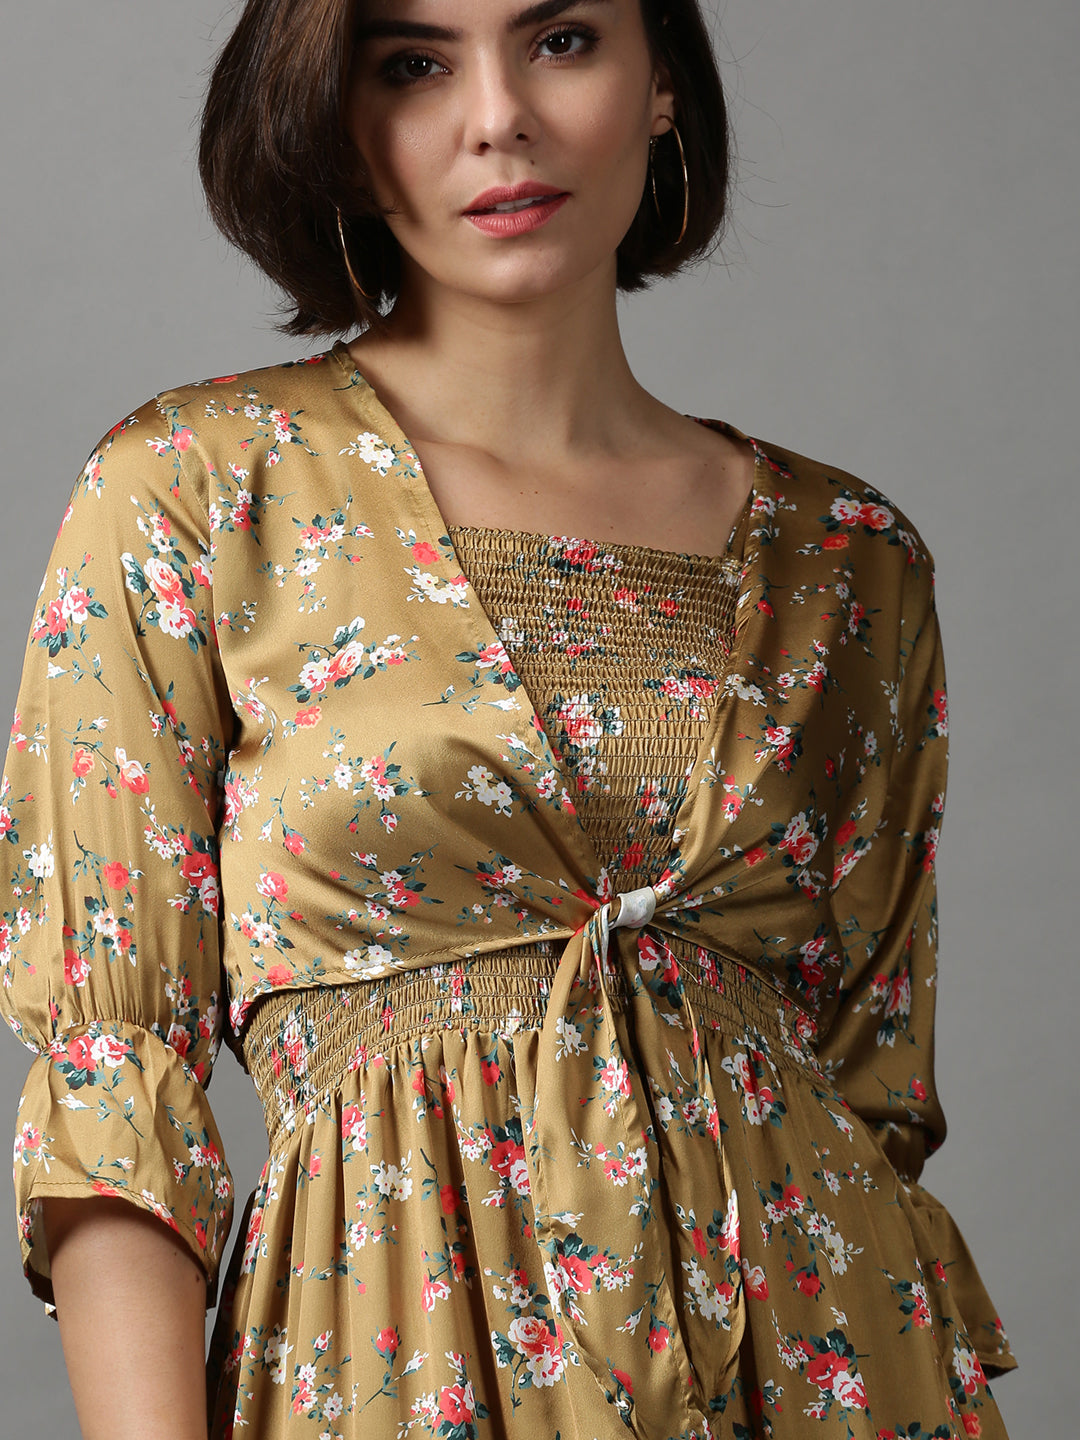 Women's Beige Printed Fit and Flare Dress